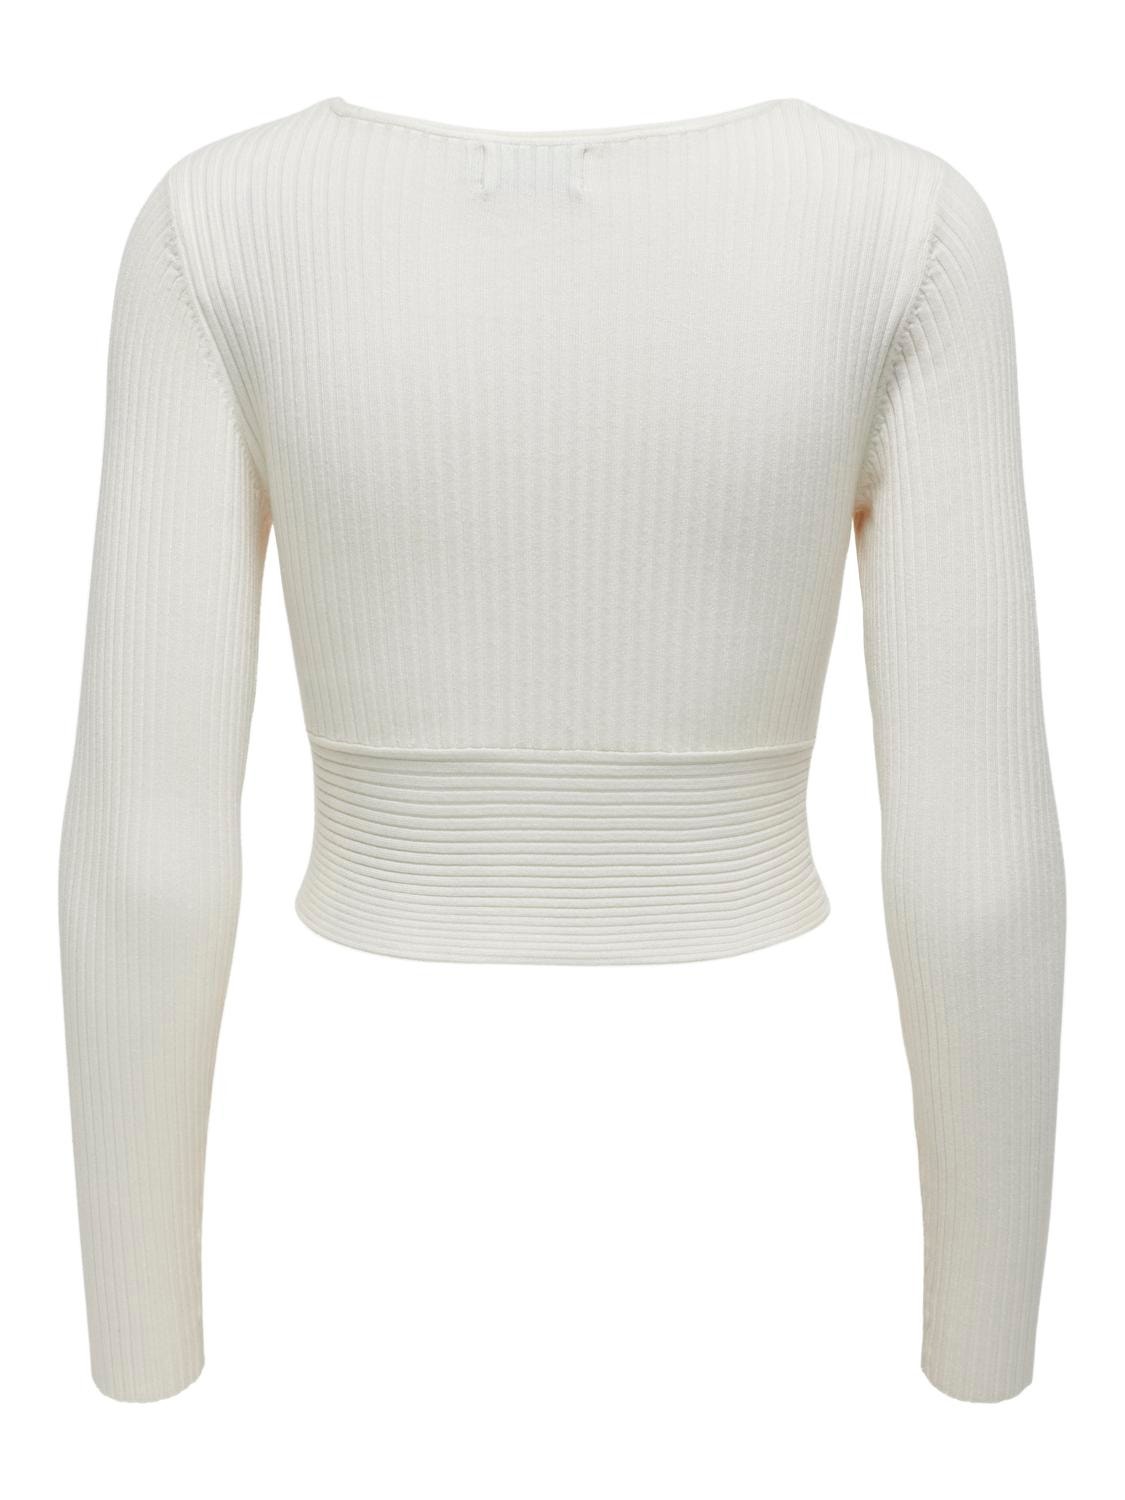 ONLY Cropped Fit V-Neck Pullover -Bright White - 15310652